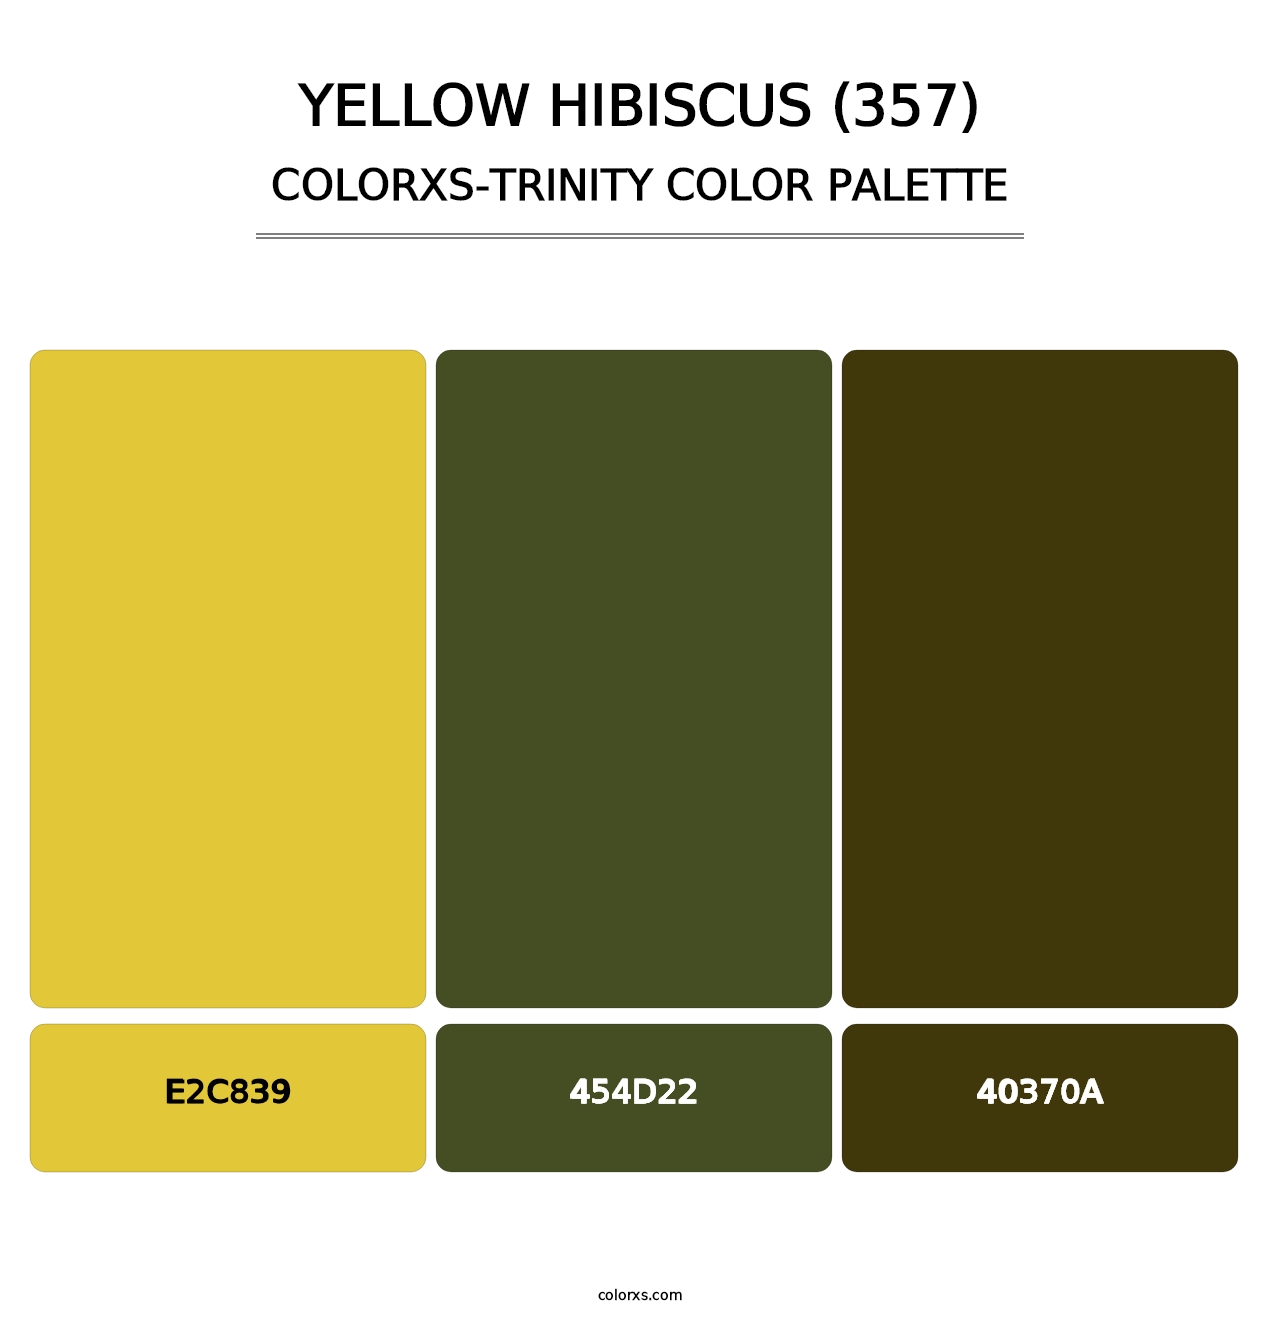 Yellow Hibiscus (357) - Colorxs Trinity Palette